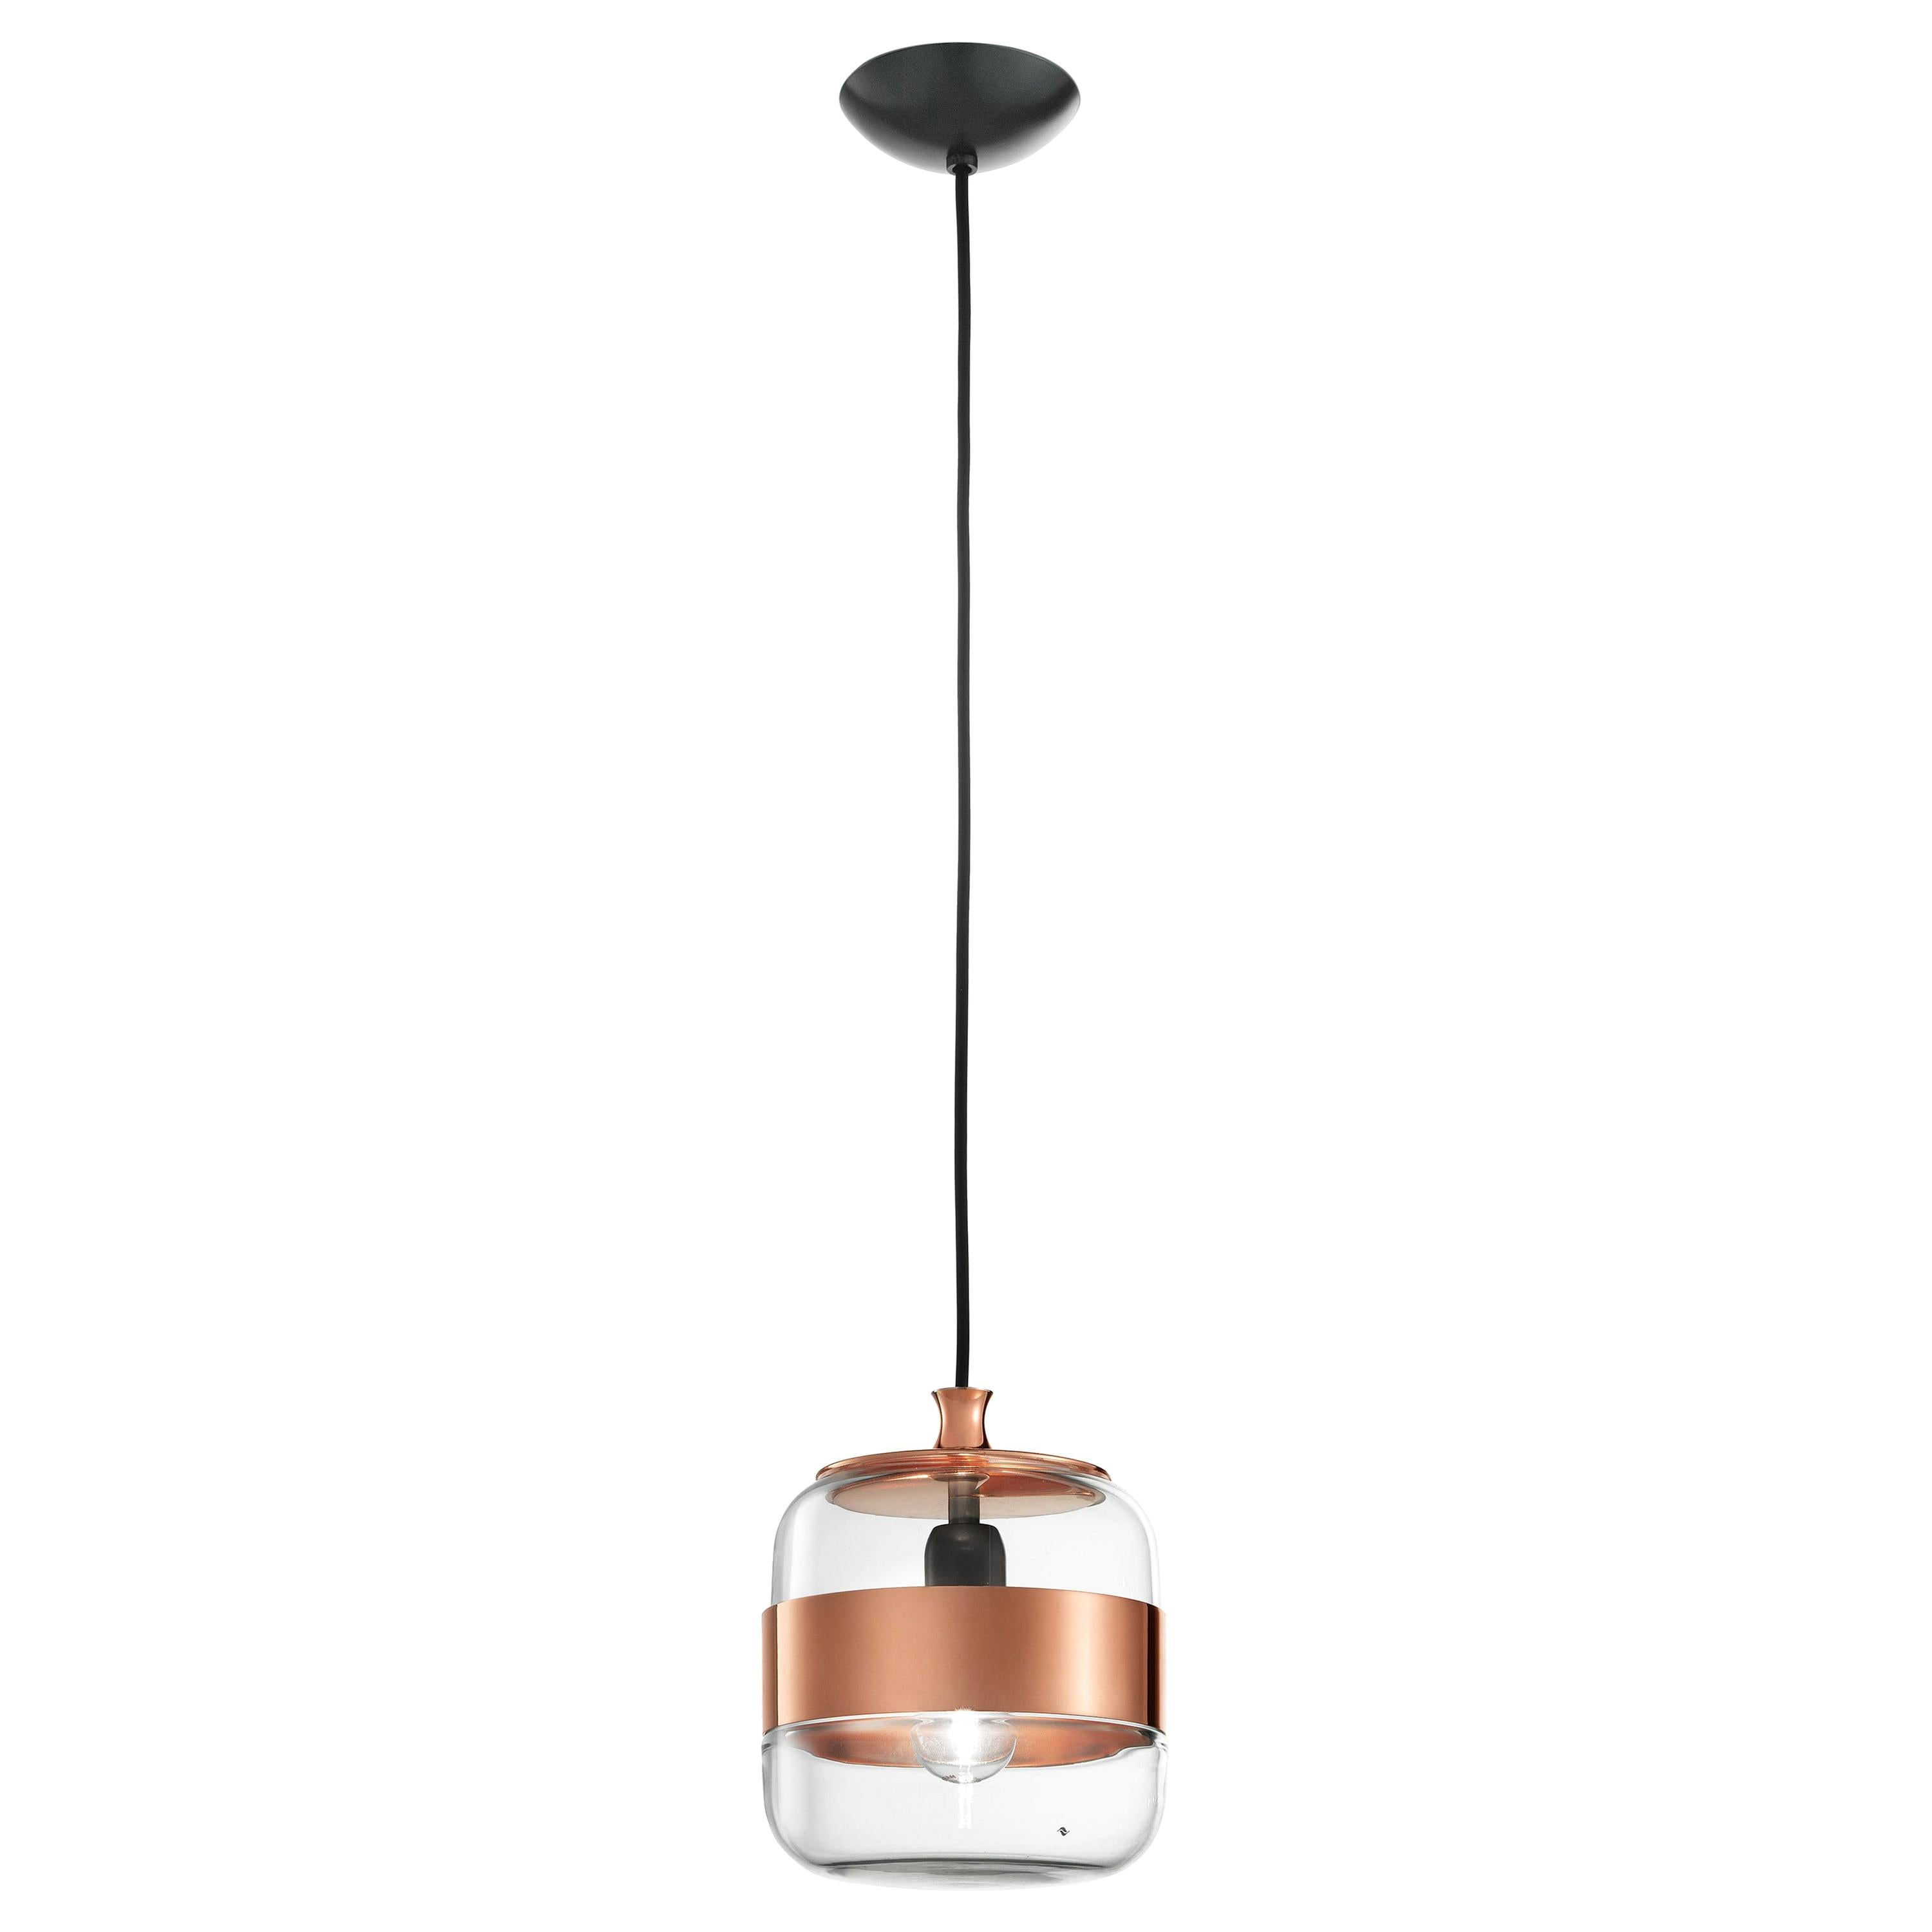 Vistosi Futura SPP Pendant Light in Crystal and Copper by Hangar Design Group